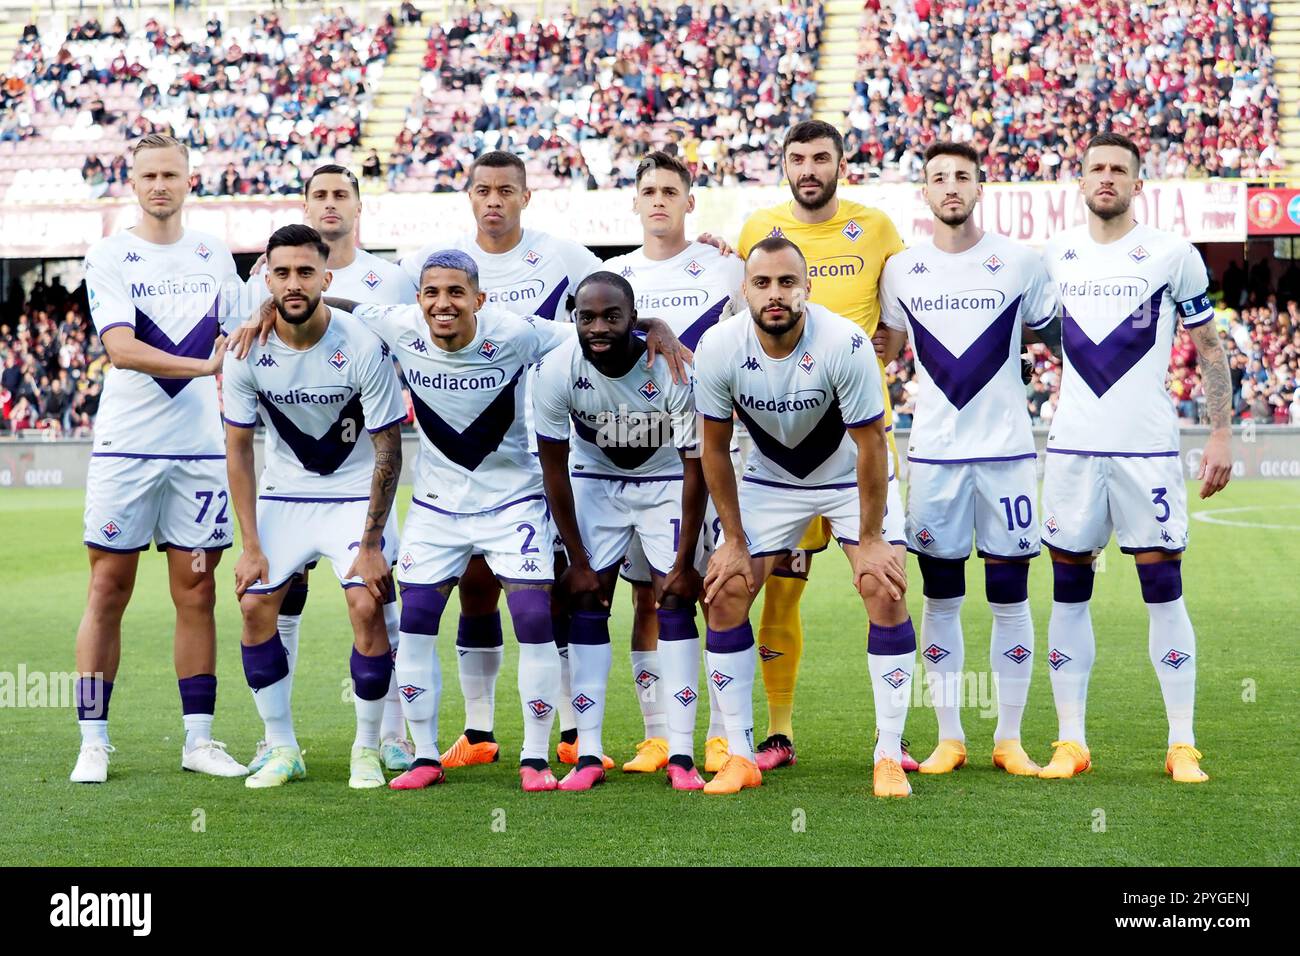 Salerno, Italy. 03rd May, 2023. Fiorentina team, during the match of the Italian Serie A league between Salernitana vs Fiorentina final result, Salernitana 3, Fiorentina 3, match played at the Diego Armando Maradona stadium. Napoli, Italy, May 03, 2023. (photo by Vincenzo Izzo/Sipa USA) Credit: Sipa USA/Alamy Live News Stock Photo